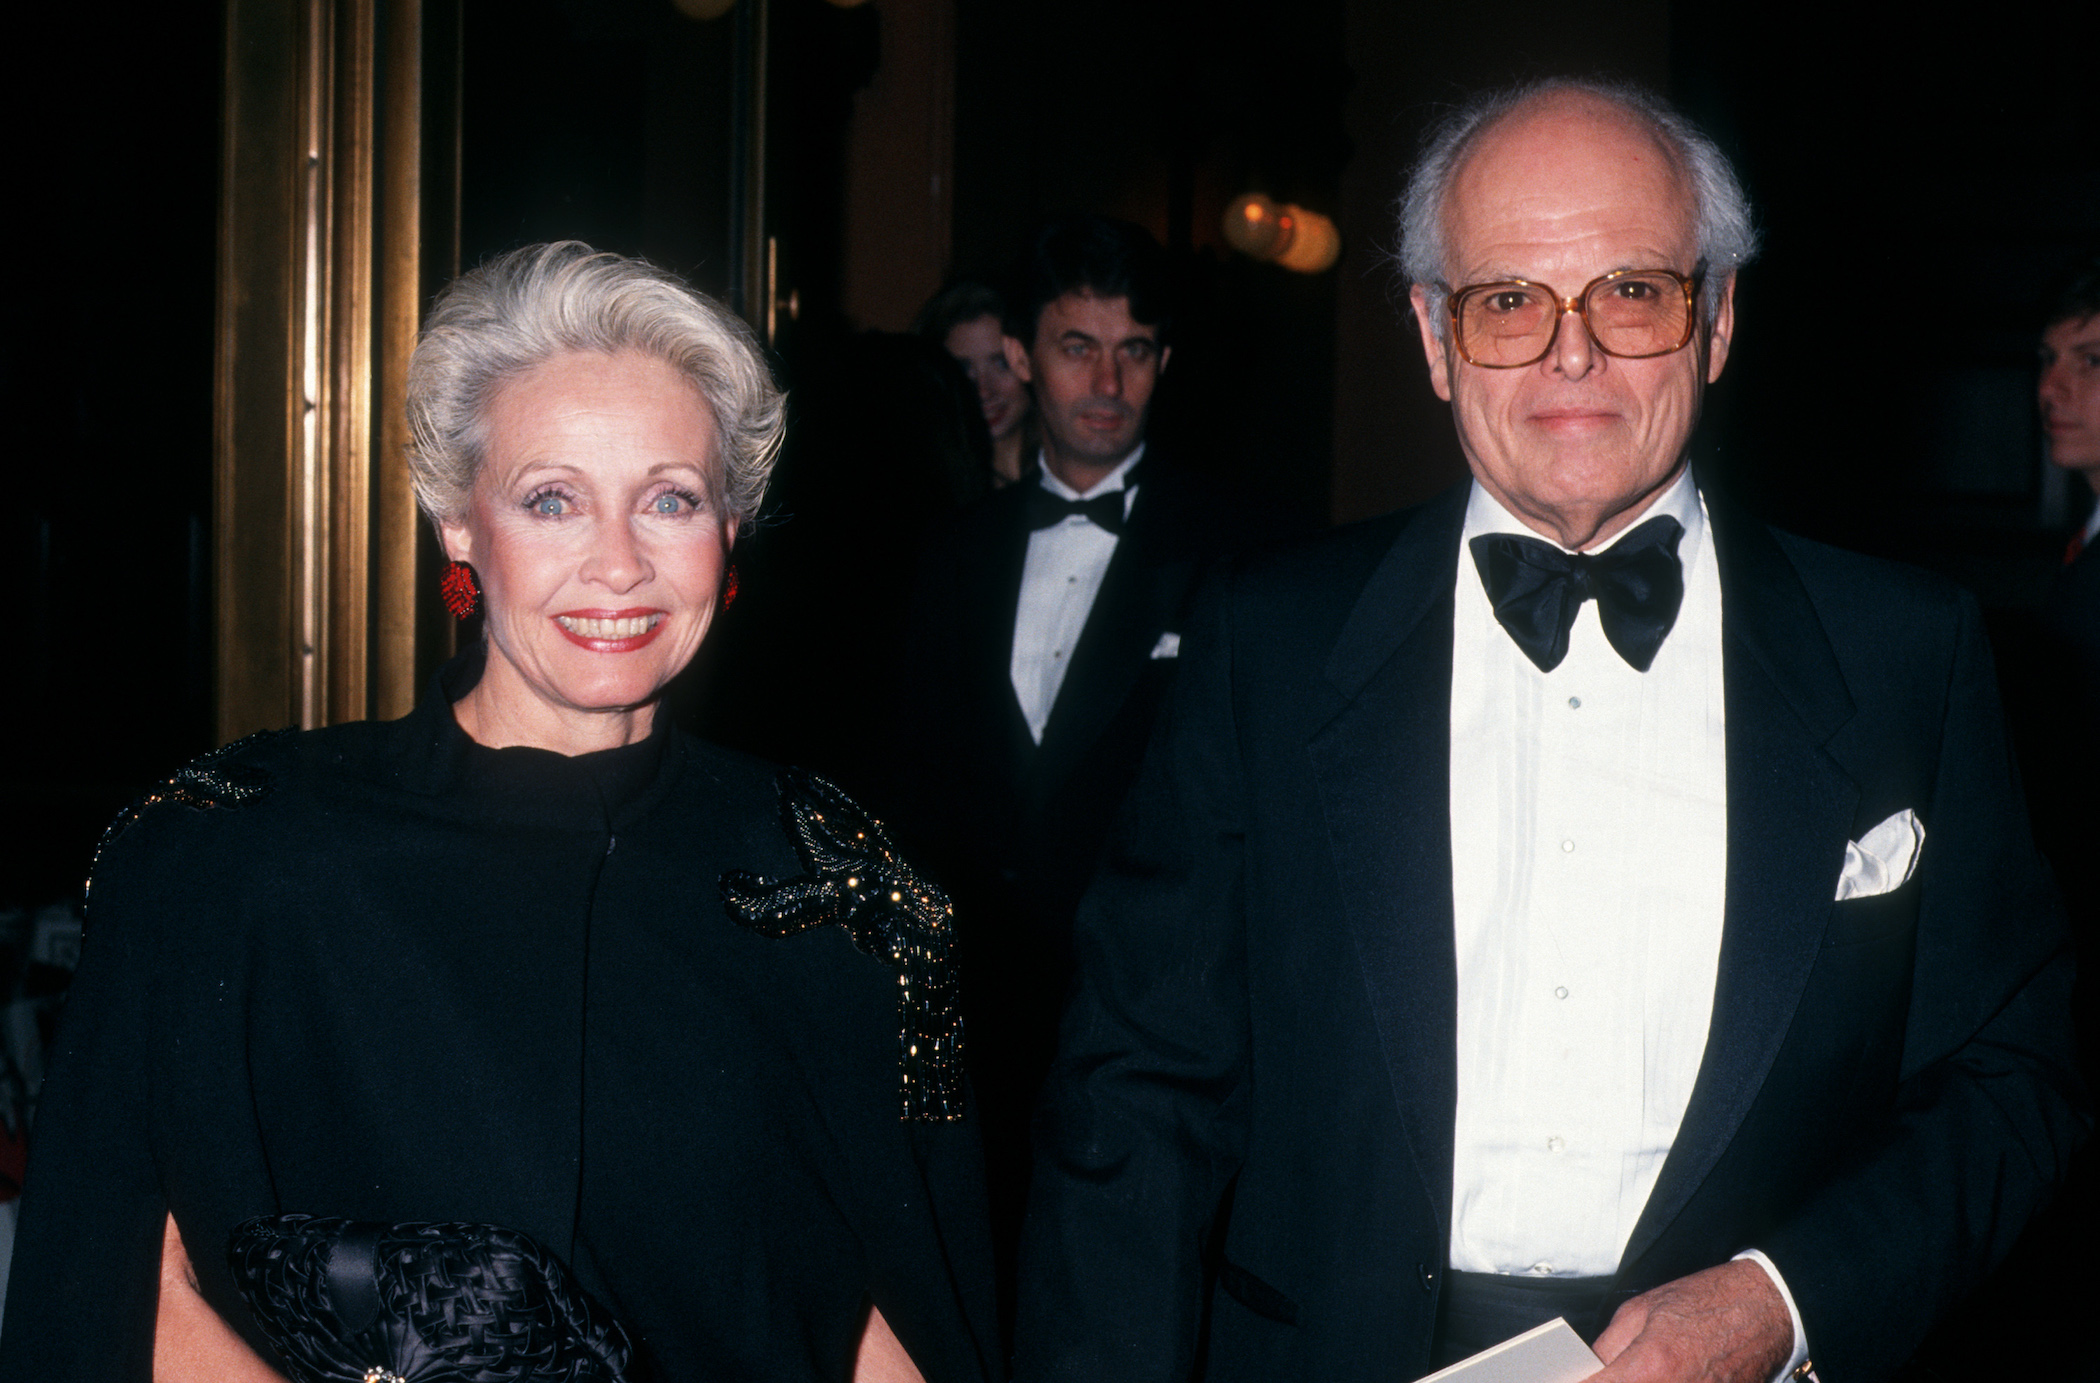 Jane Powell and Jane Powell's spouse, Dickie Moore, attending a formal event together